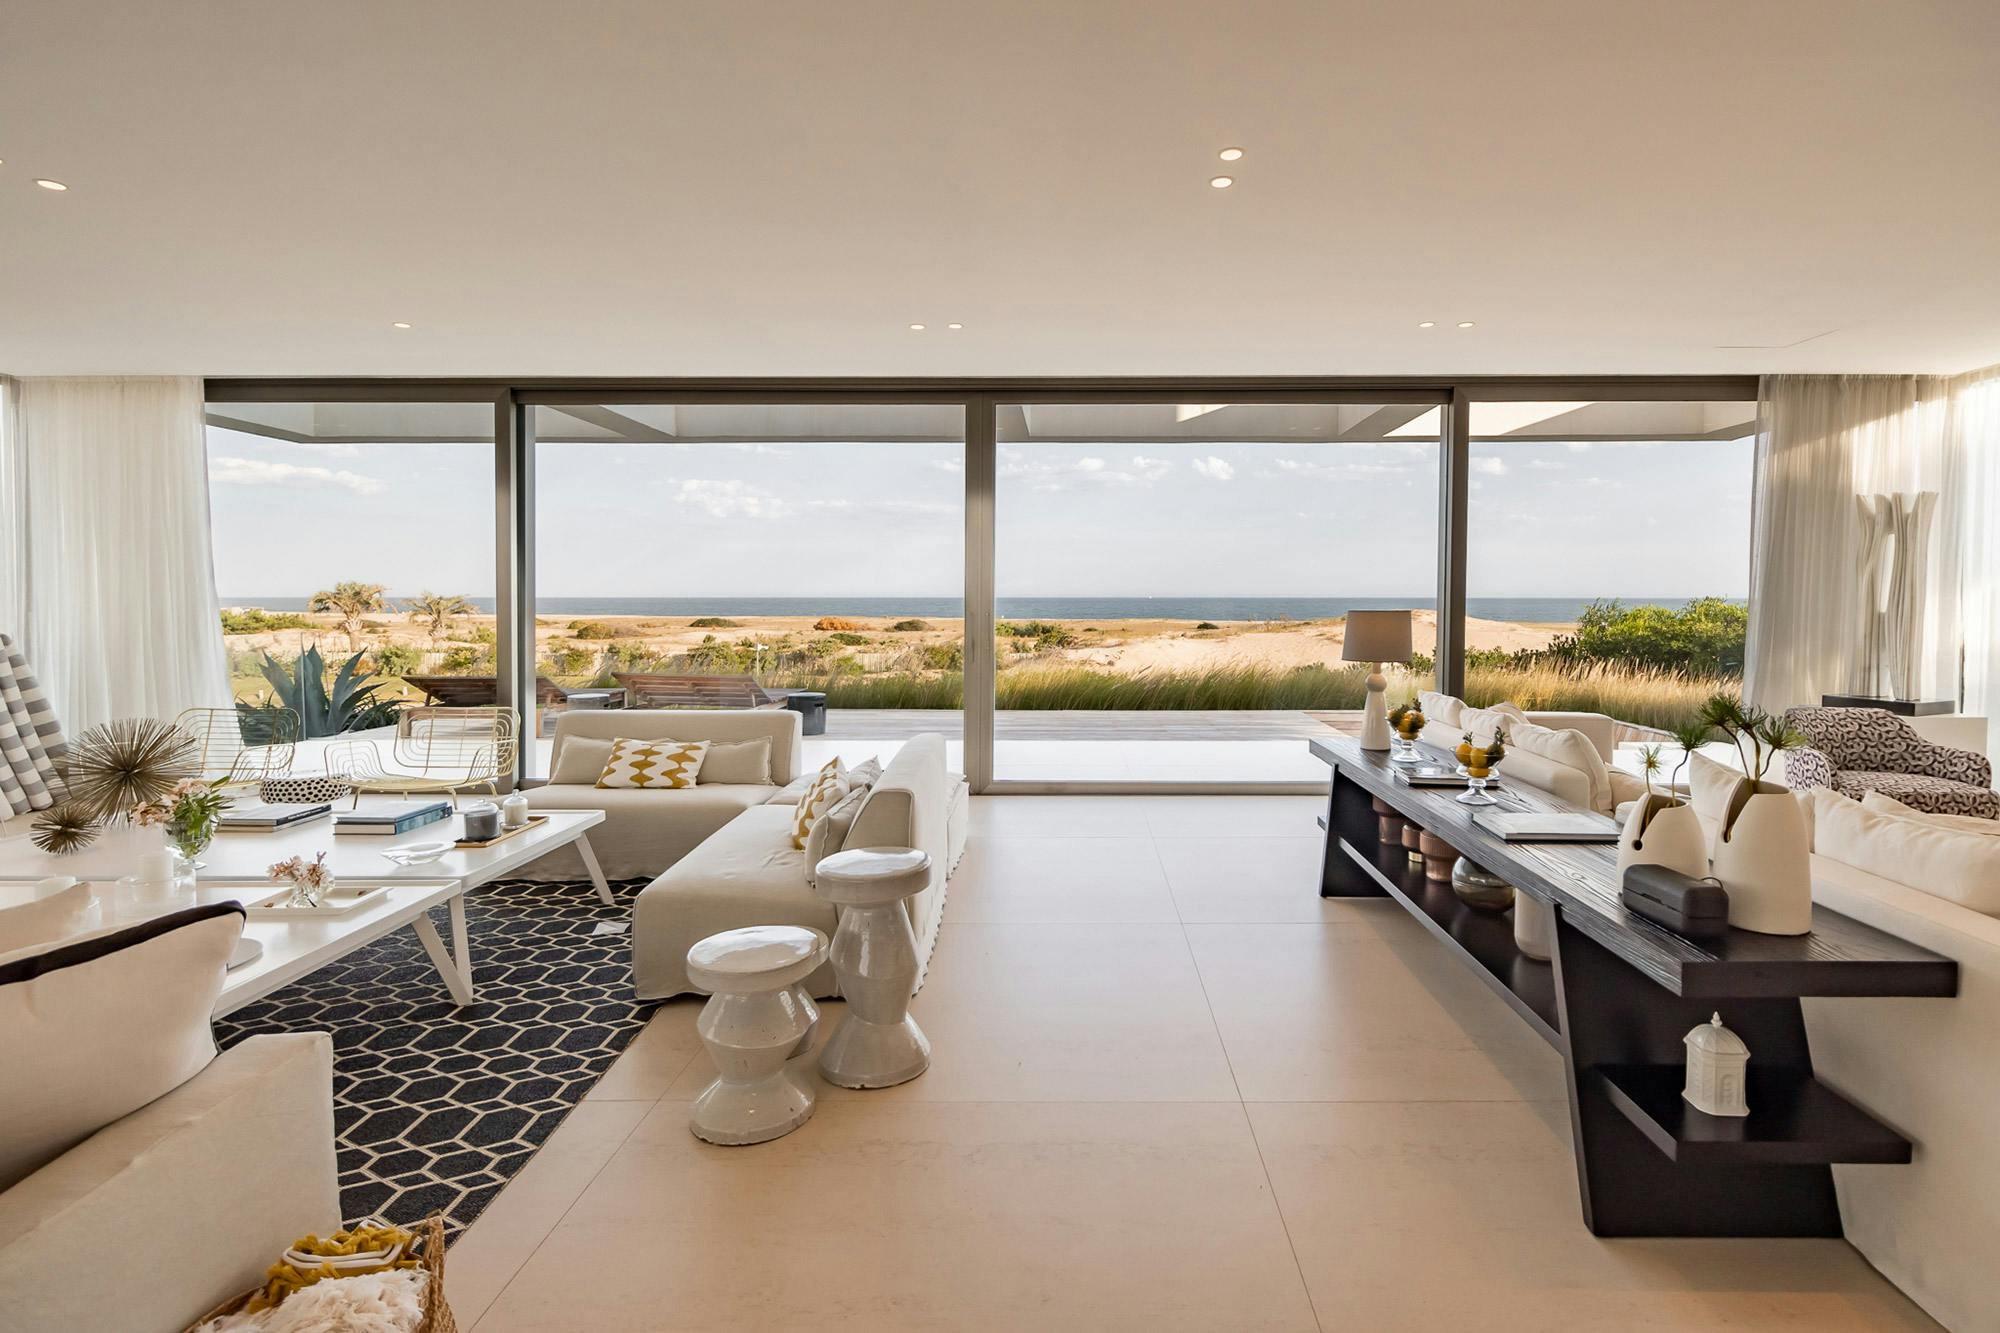 Imagem número 32 da actual secção de A house with a view of the landscape that strikes the perfect balance between privacy and openness to the outside world da Cosentino Portugal